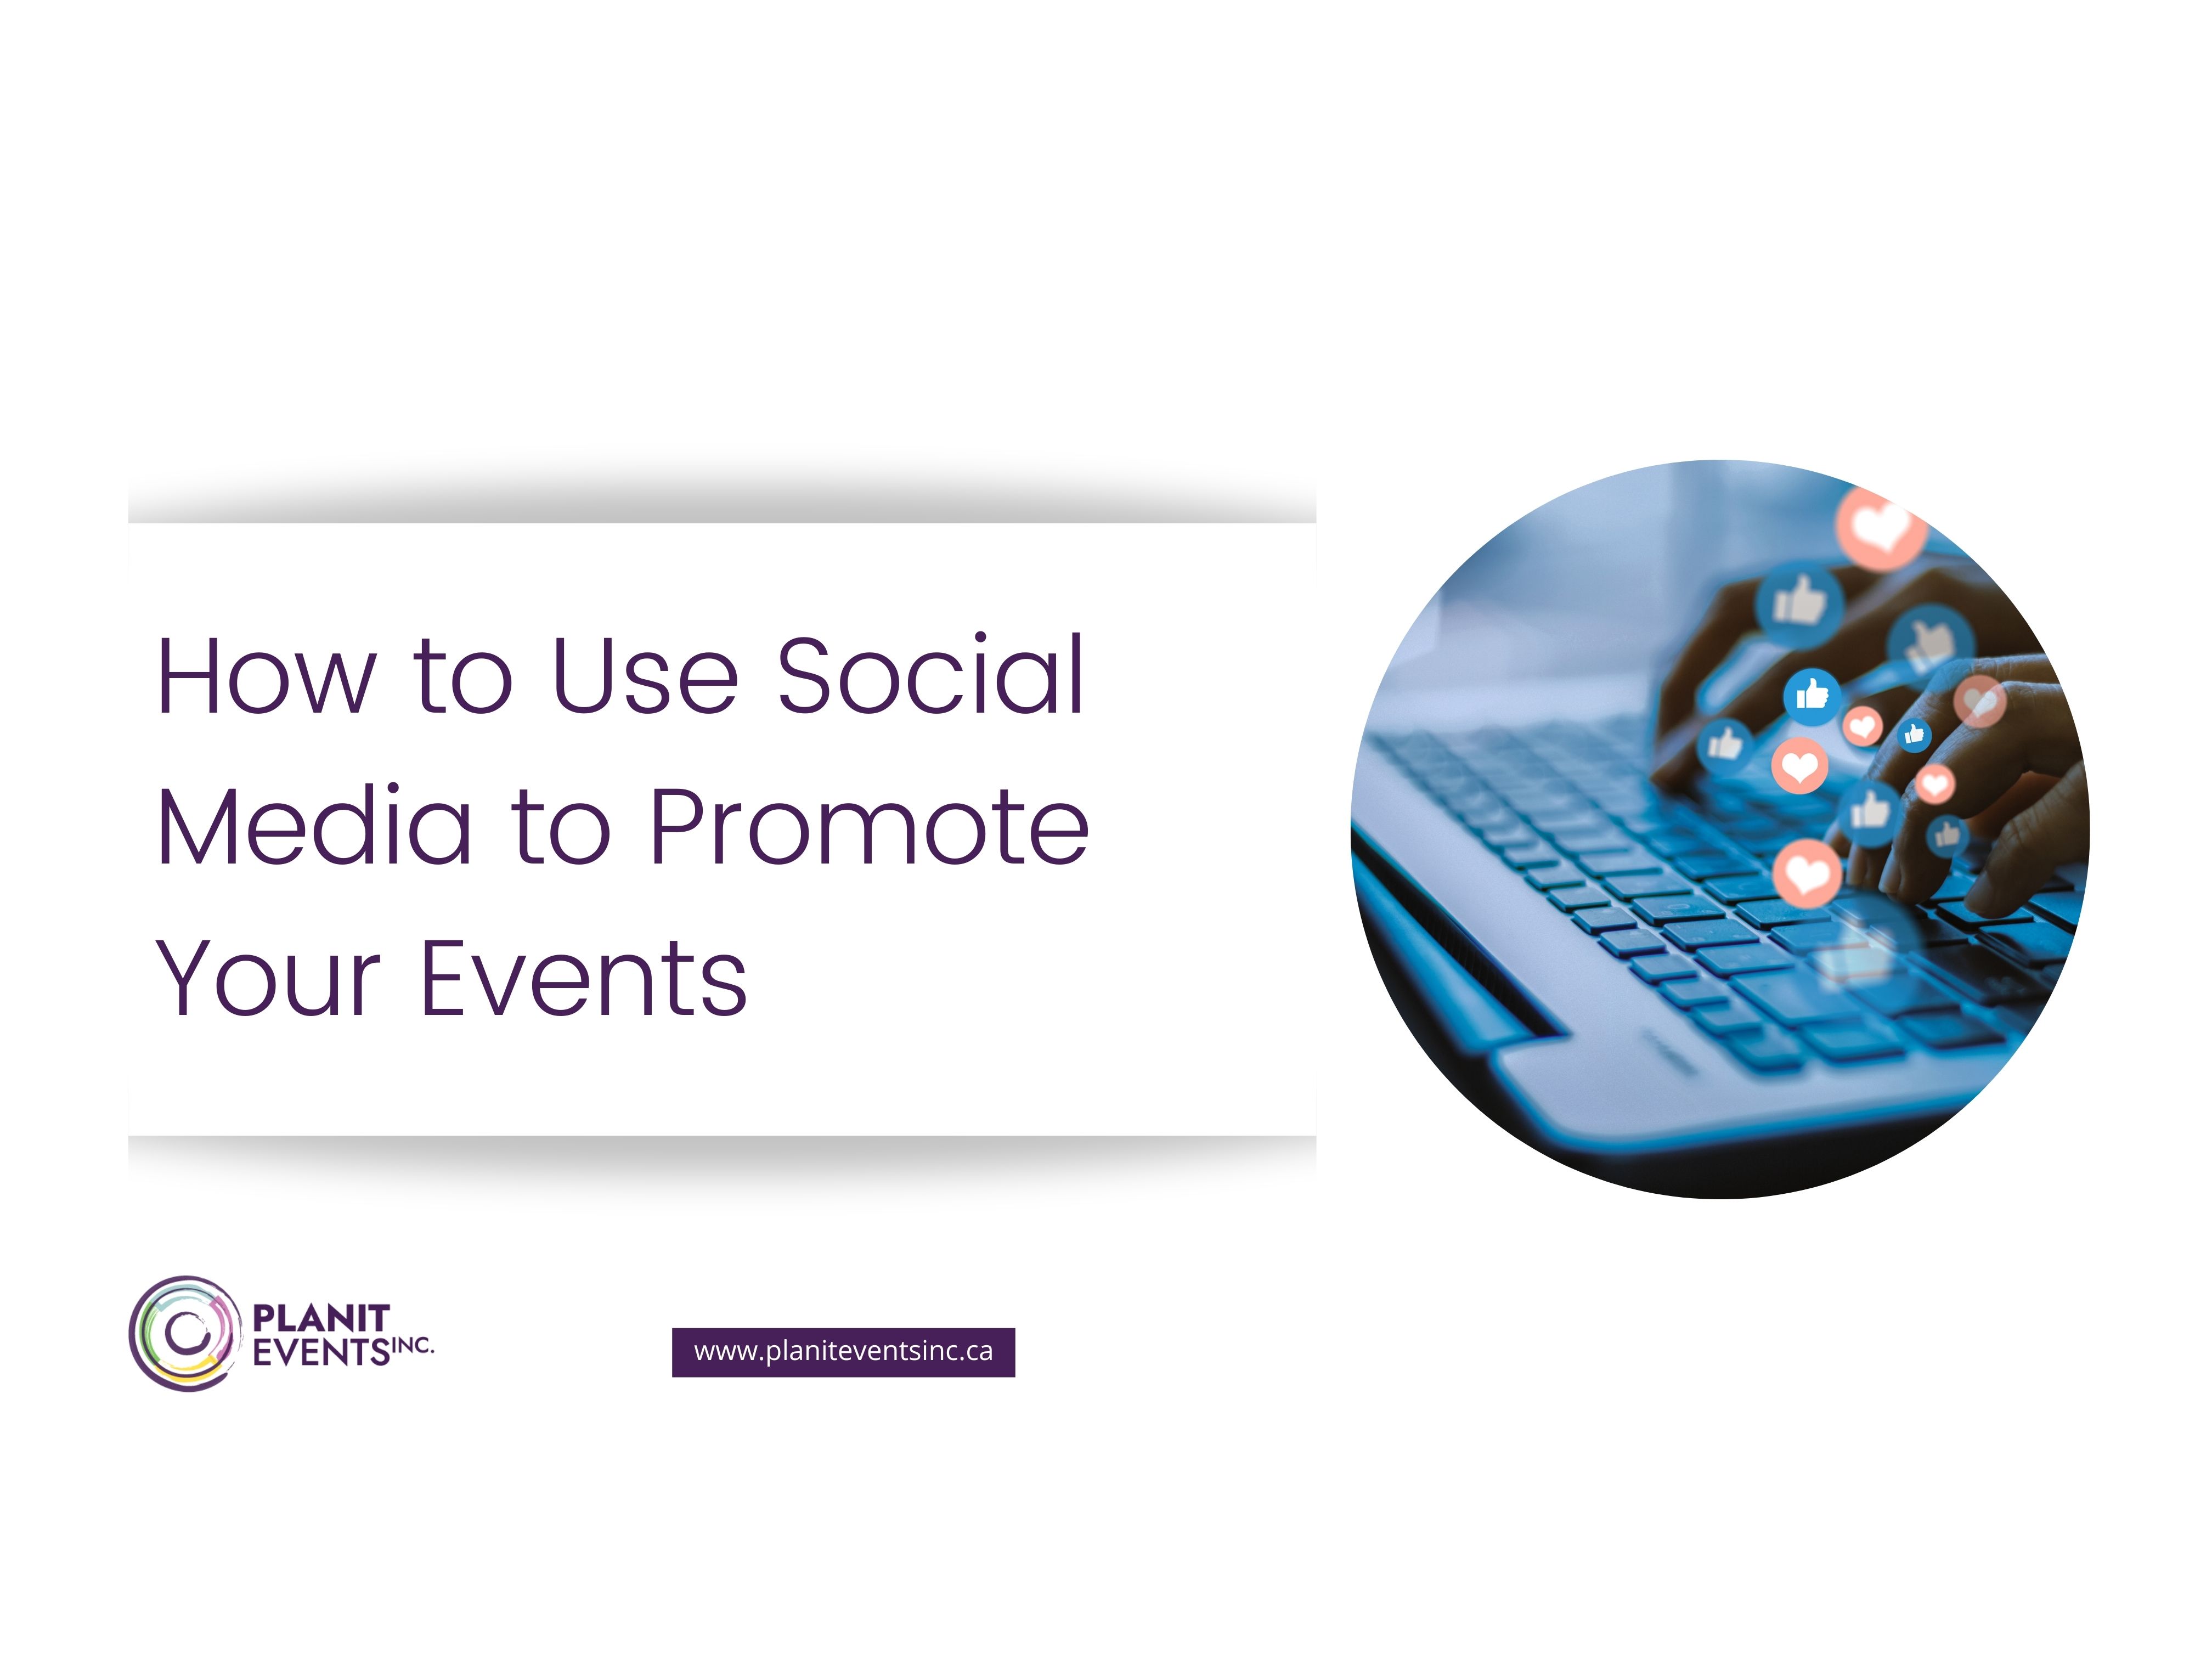 How to Use Social Media to Promote Your Events